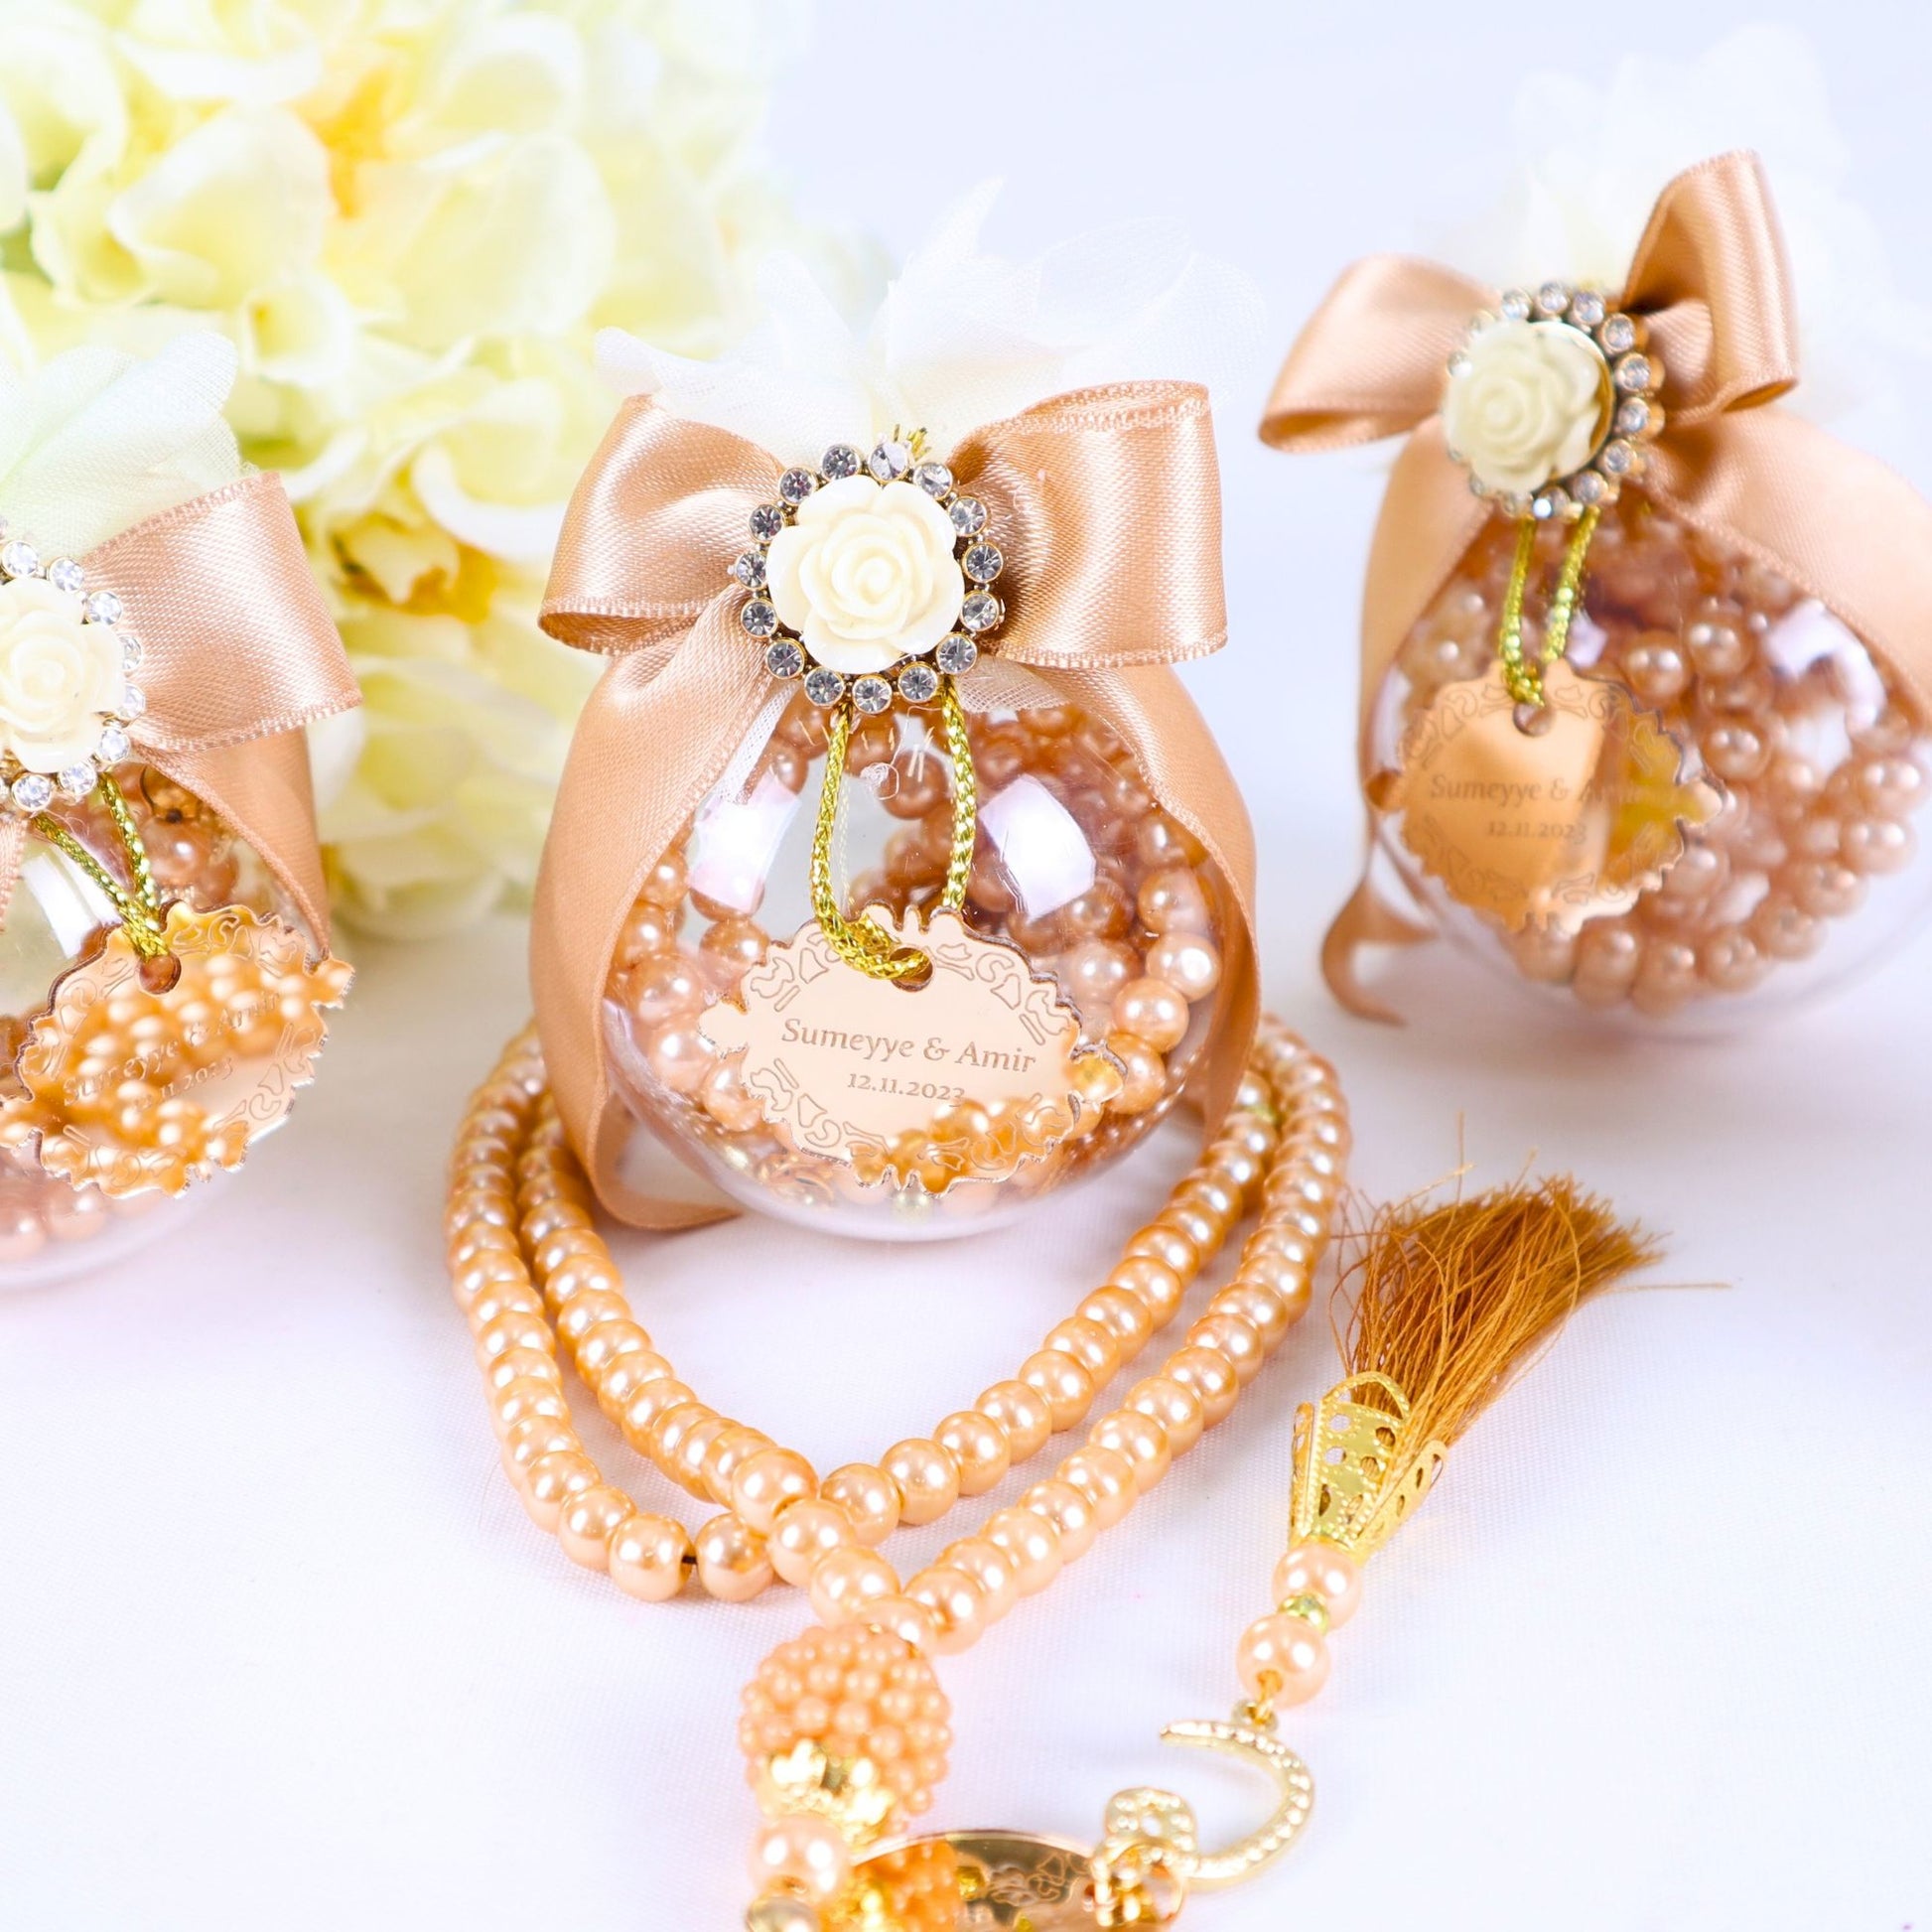 Personalized Pearl Prayer Bead Muslim Wedding Baby Shower Ramadan Gift - Islamic Elite Favors is a handmade gift shop offering a wide variety of unique and personalized gifts for all occasions. Whether you're looking for the perfect Ramadan, Eid, Hajj, wedding gift or something special for a birthday, baby shower or anniversary, we have something for everyone. High quality, made with love.